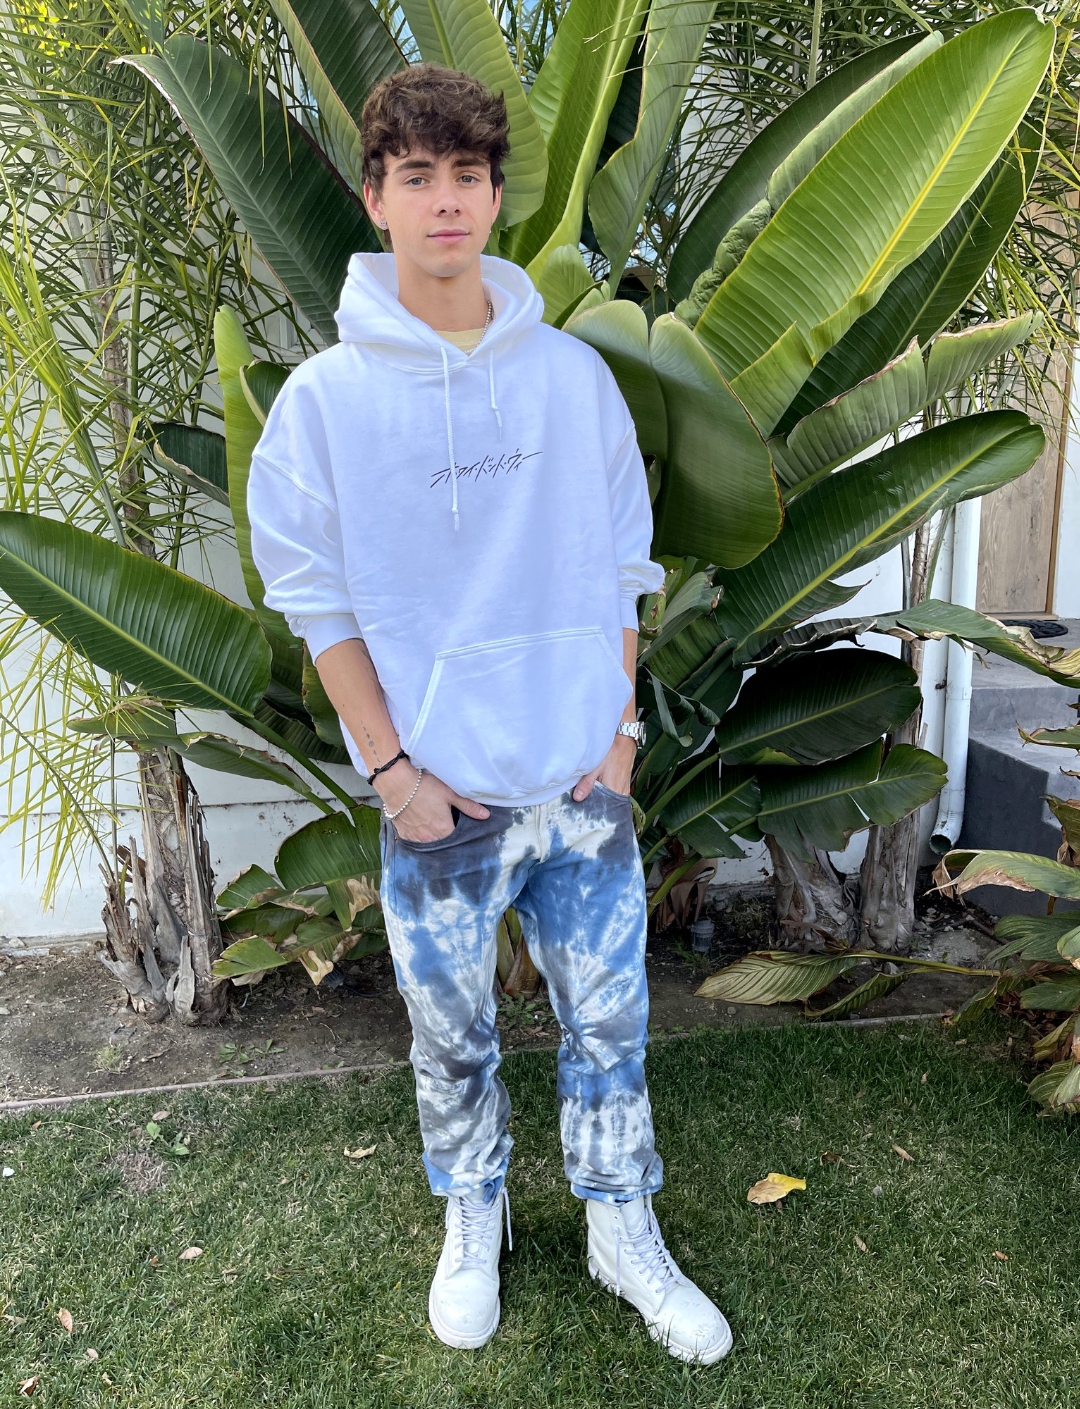 Picture of Corbyn Besson in General Pictures - corbyn-besson-1610468578 ...